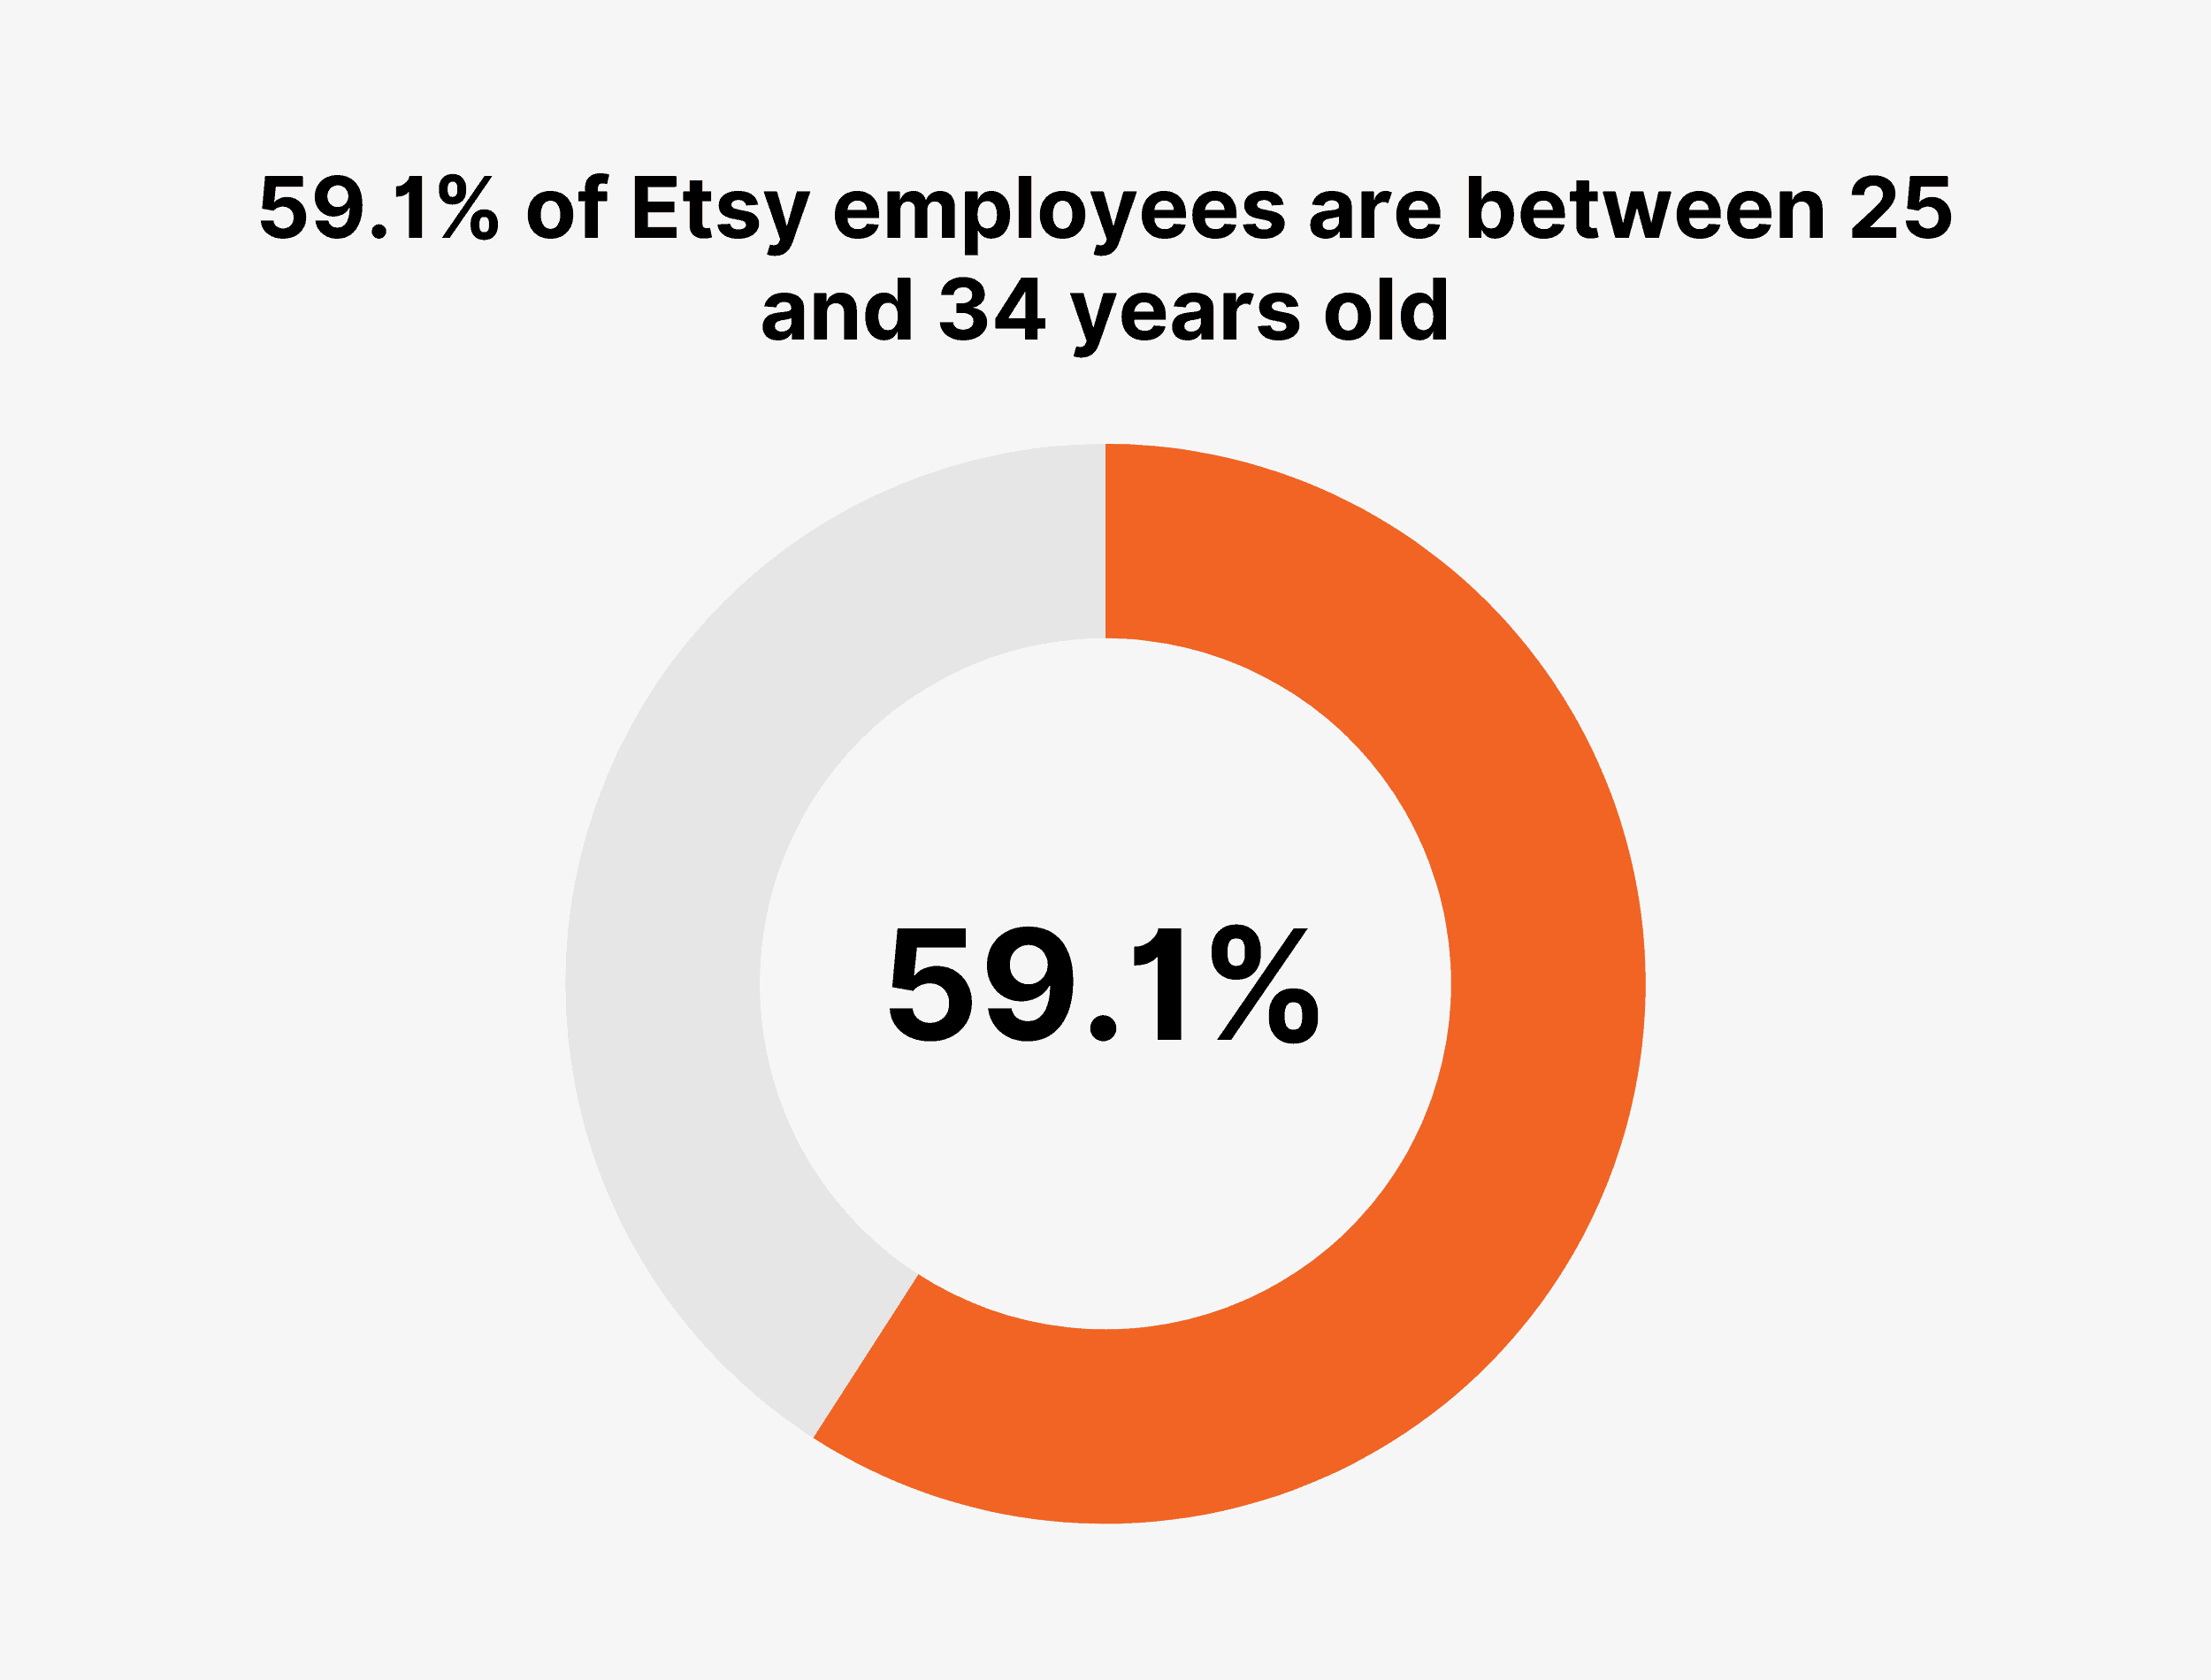 59.1% of Etsy employees are between 25 and 34 years old